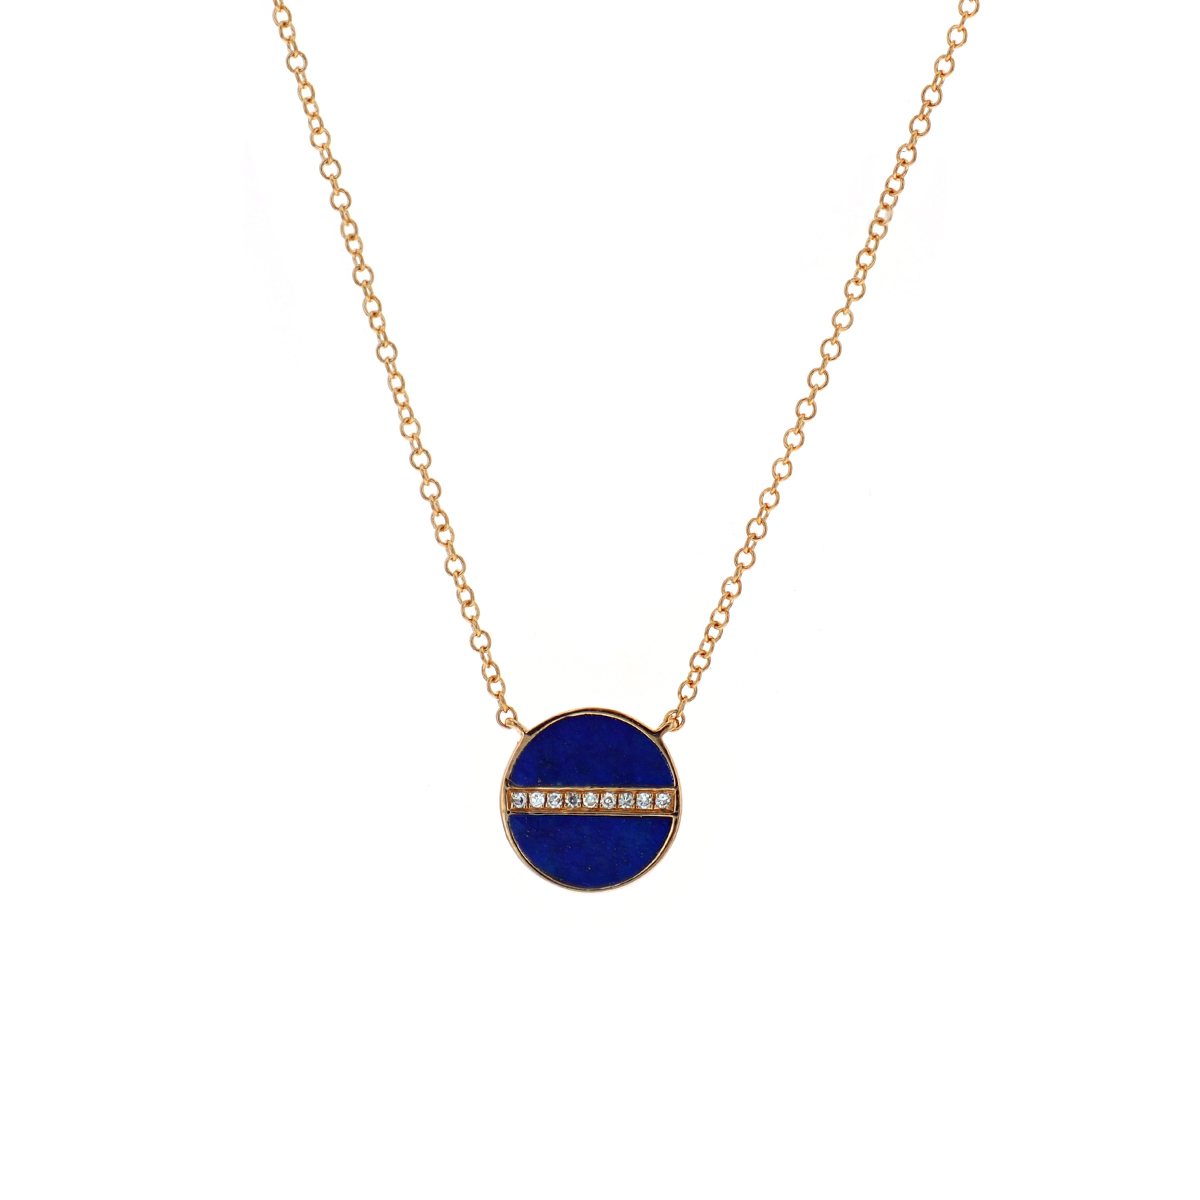 14K Yellow Gold Lapis and Diamond Necklace